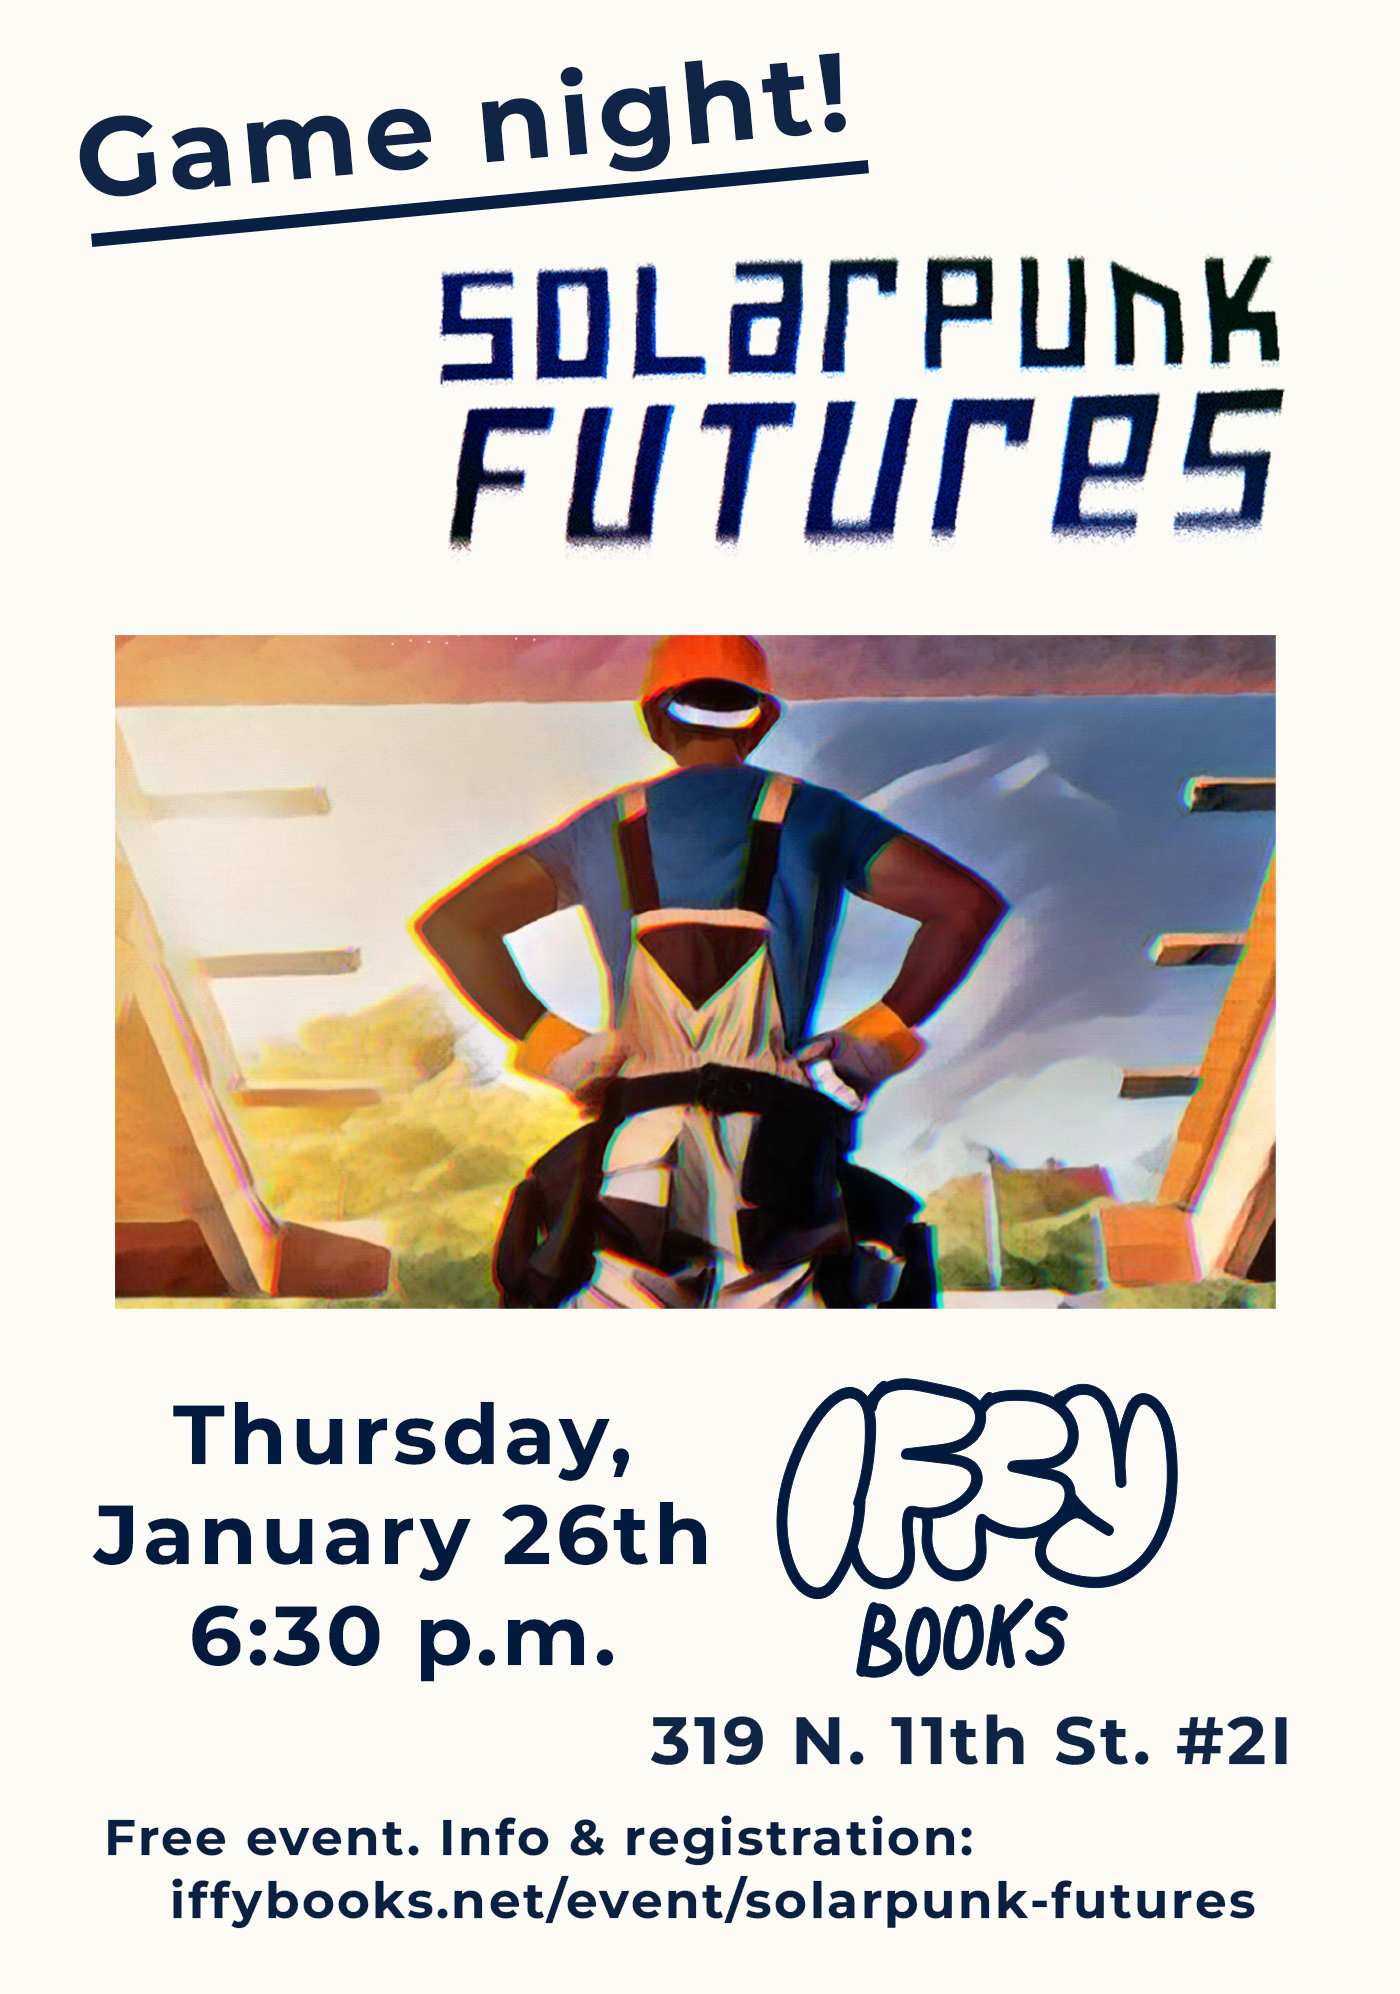 Flyer with an illustration of a person in a red hard hat building a house in front of a lush, sunny background. The text reads as follows: Game night! Solarpunk Futures Thursday, January 26th 6:30 p.m. 319 N. 11th St. #2I Free event. Info & registration: iffybooks.net/event/solarpunk-futures